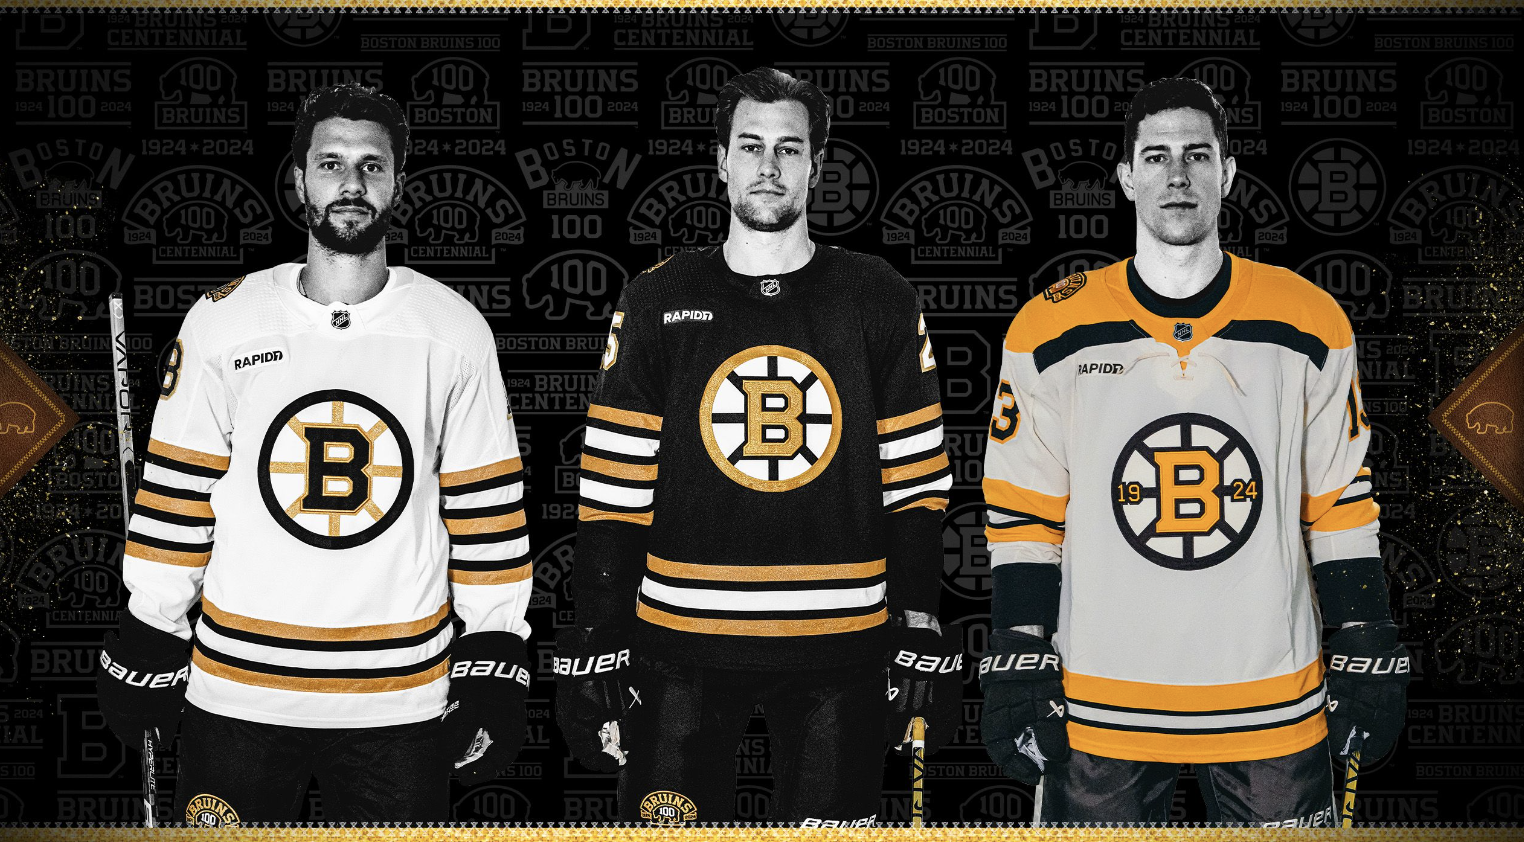 Bruins unveil 100th anniversary jerseys for the 2023-24 season